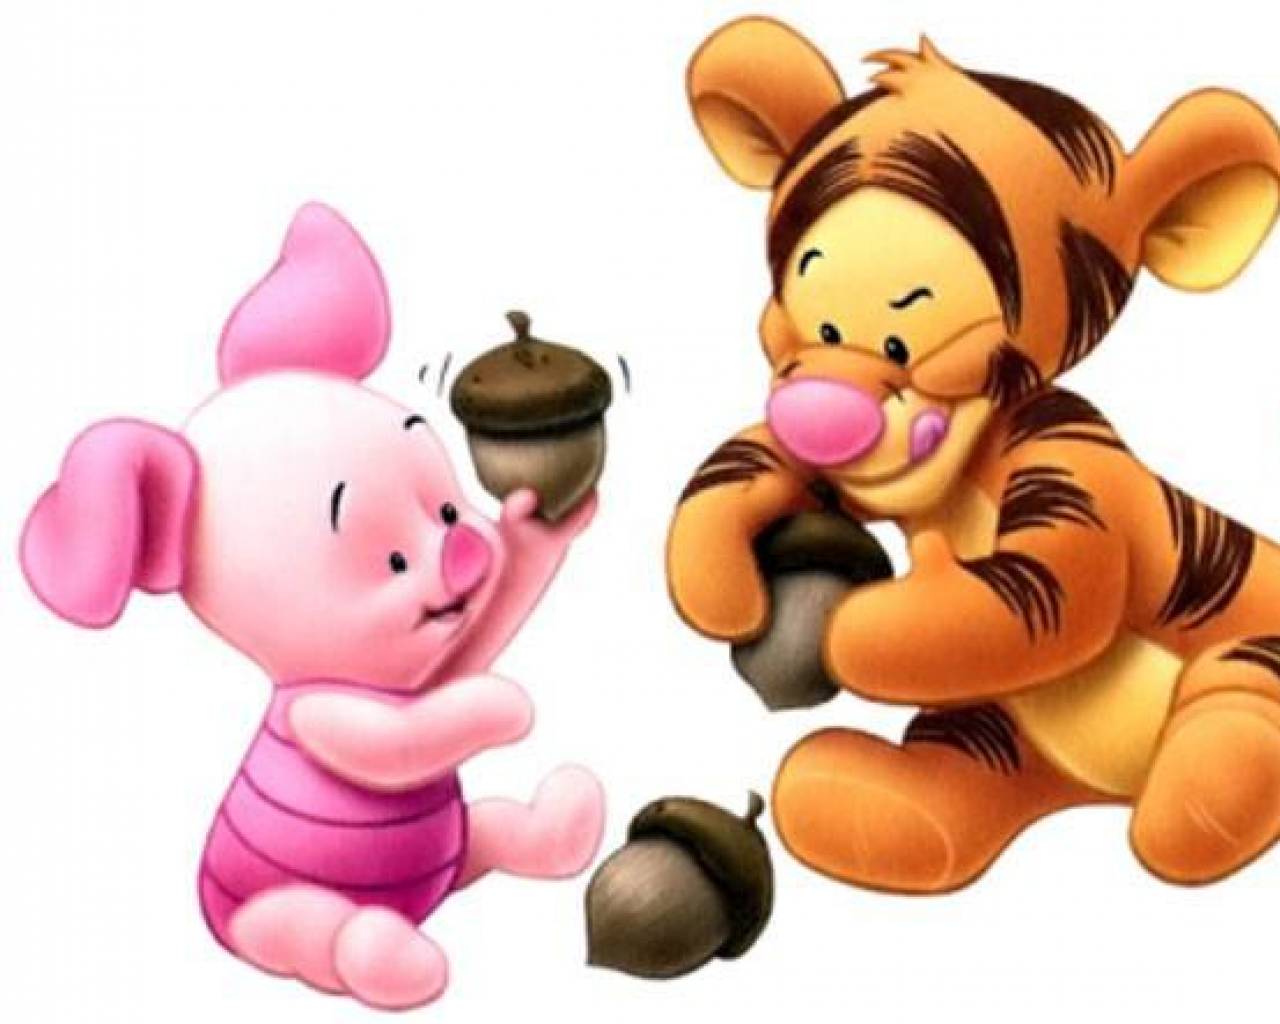 Baby Piglet Wallpaper Baby Pooh Wallpaper For Mobile. Things To